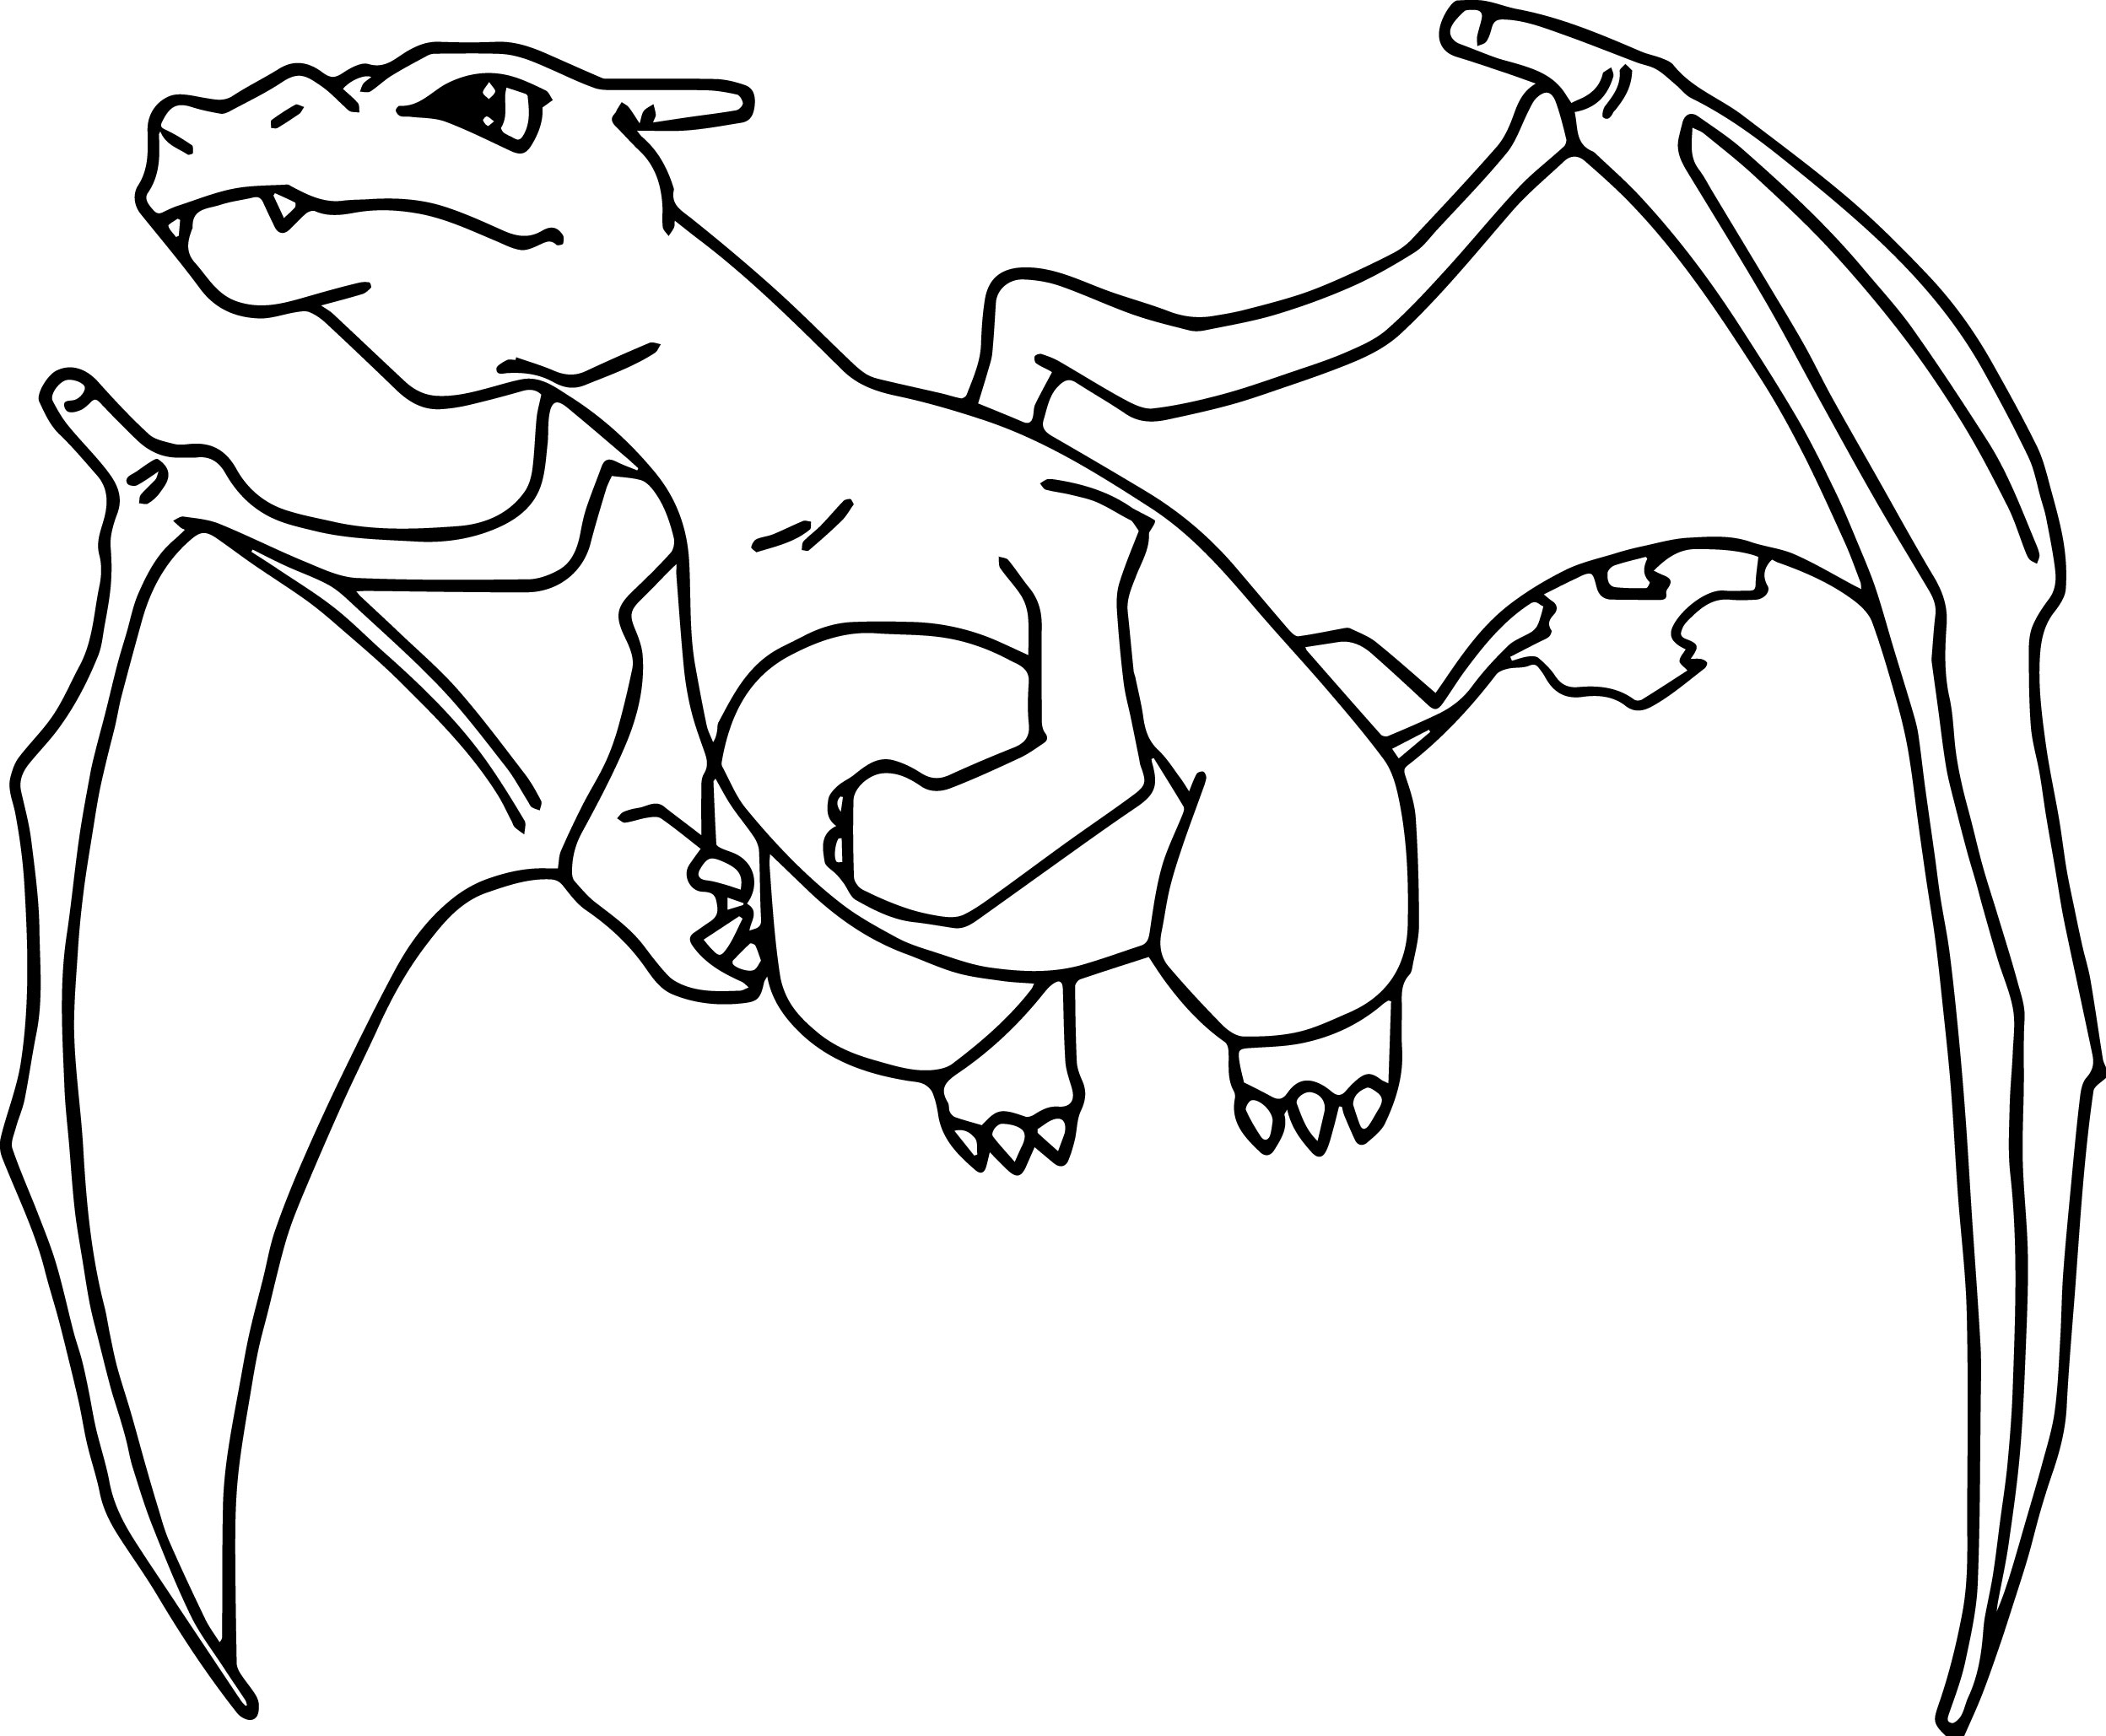 charizard coloring pages - High Quality Coloring Pages